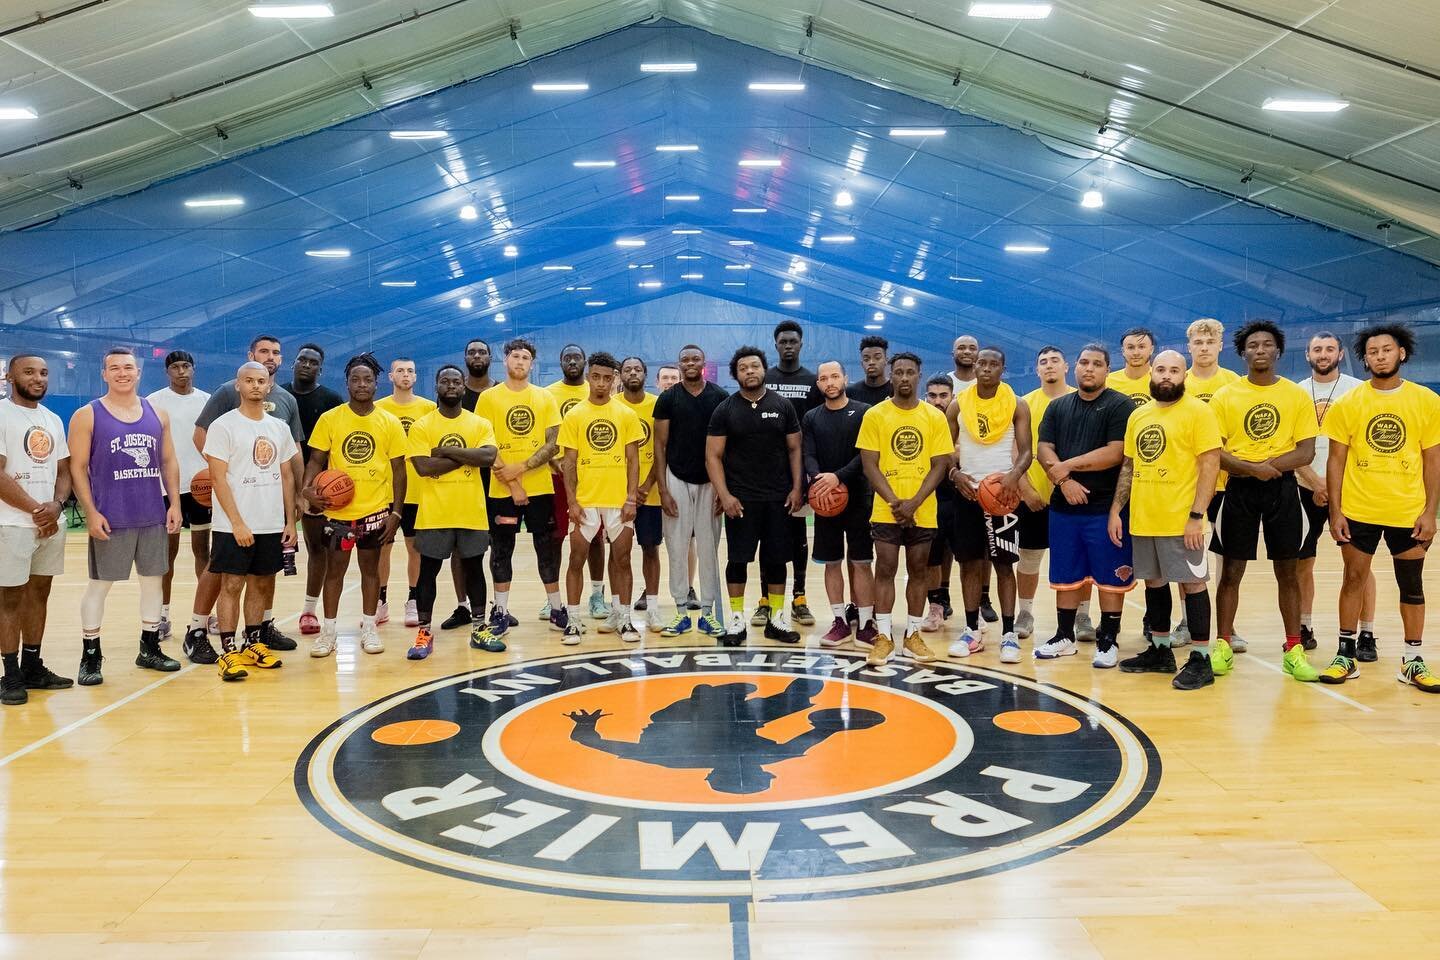 TOUGH squads💪🏀🏆 Only 10 DAYS LEFT to lock in your team for the 4th Annual WAFA Invitational 3v3 Tournament hosted by @nextlevel_sportscenter! 

🚨DEADLINE SATURDAY JULY 30th🚨

Visit our website for more information on registration: wafainvitation